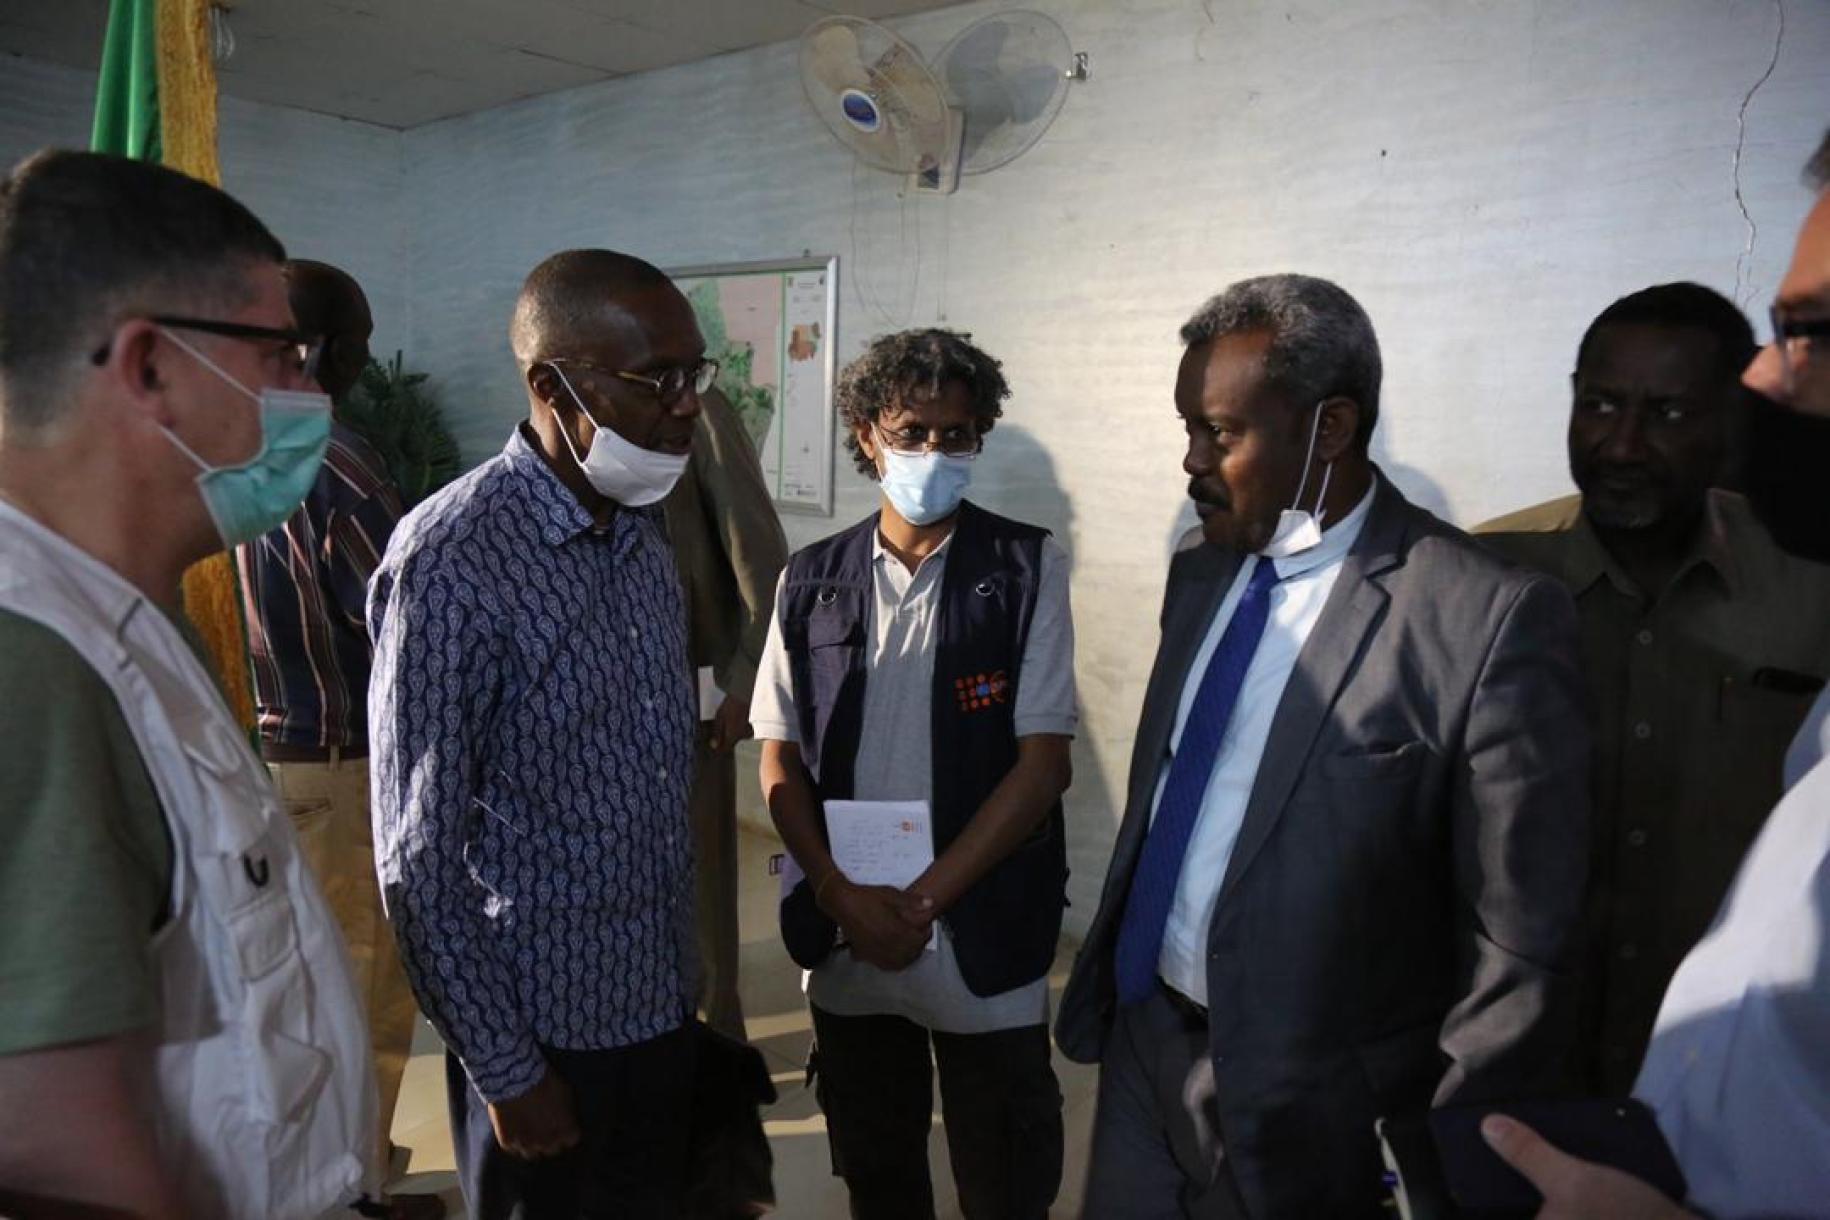 UN Resident Coordinator of Sudan, Babacar Cissé with UN staff members and the camp's security team lead, Wali